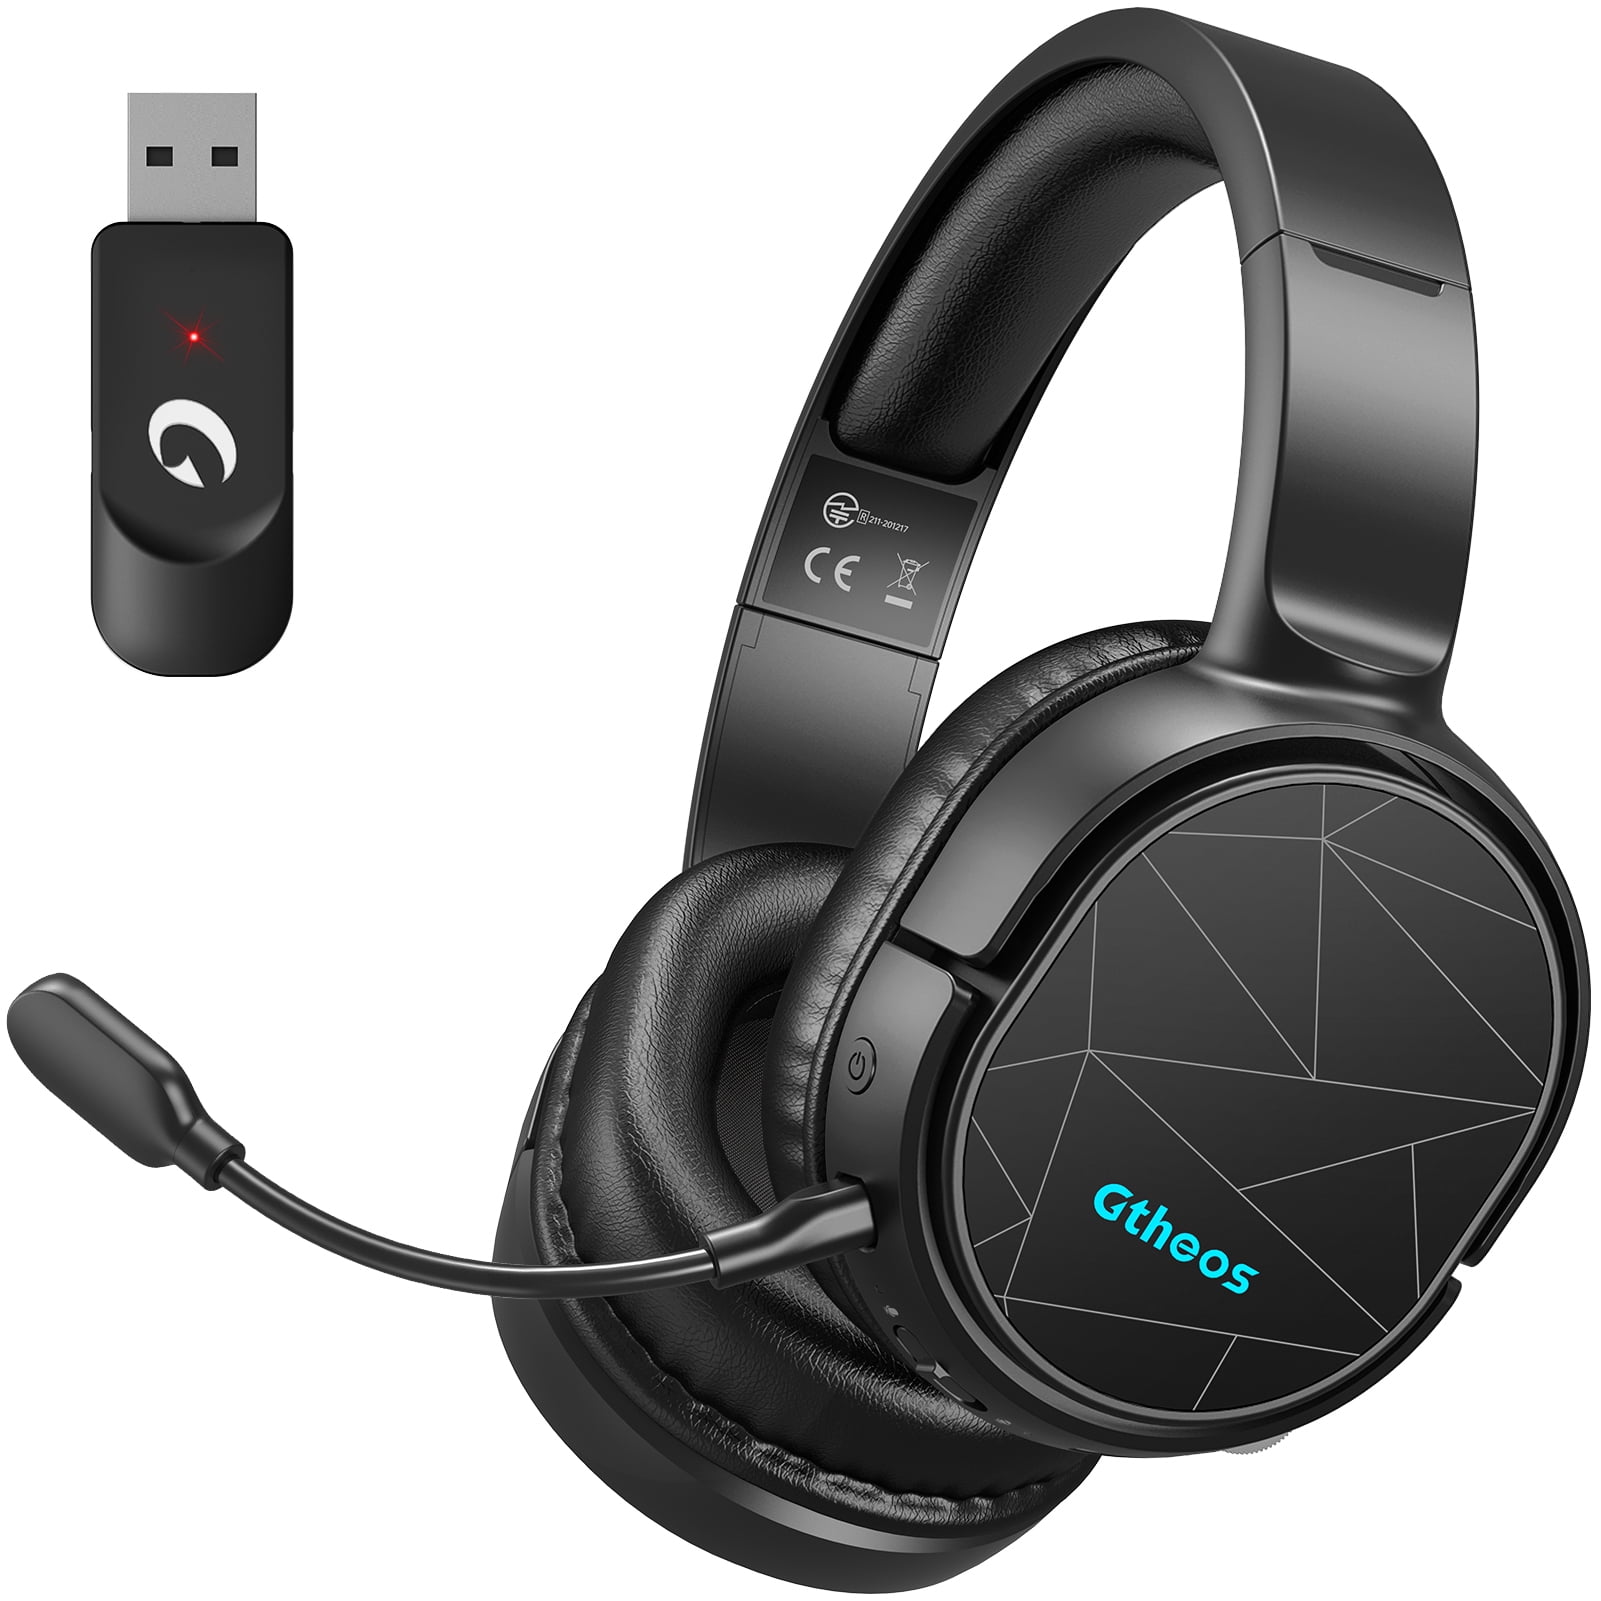 pilfer Regelmæssigt Kæledyr Gtheos Gaming Headset, Gtheos Wireless Gaming Headset Lossless 2.4GHz for  PC PS4 PS5, Bluetooth Gaming Headphones with Detachable Noise Canceling  Mic, 7.1 Surround Sound, 30H Long Lasting Battery - Walmart.com